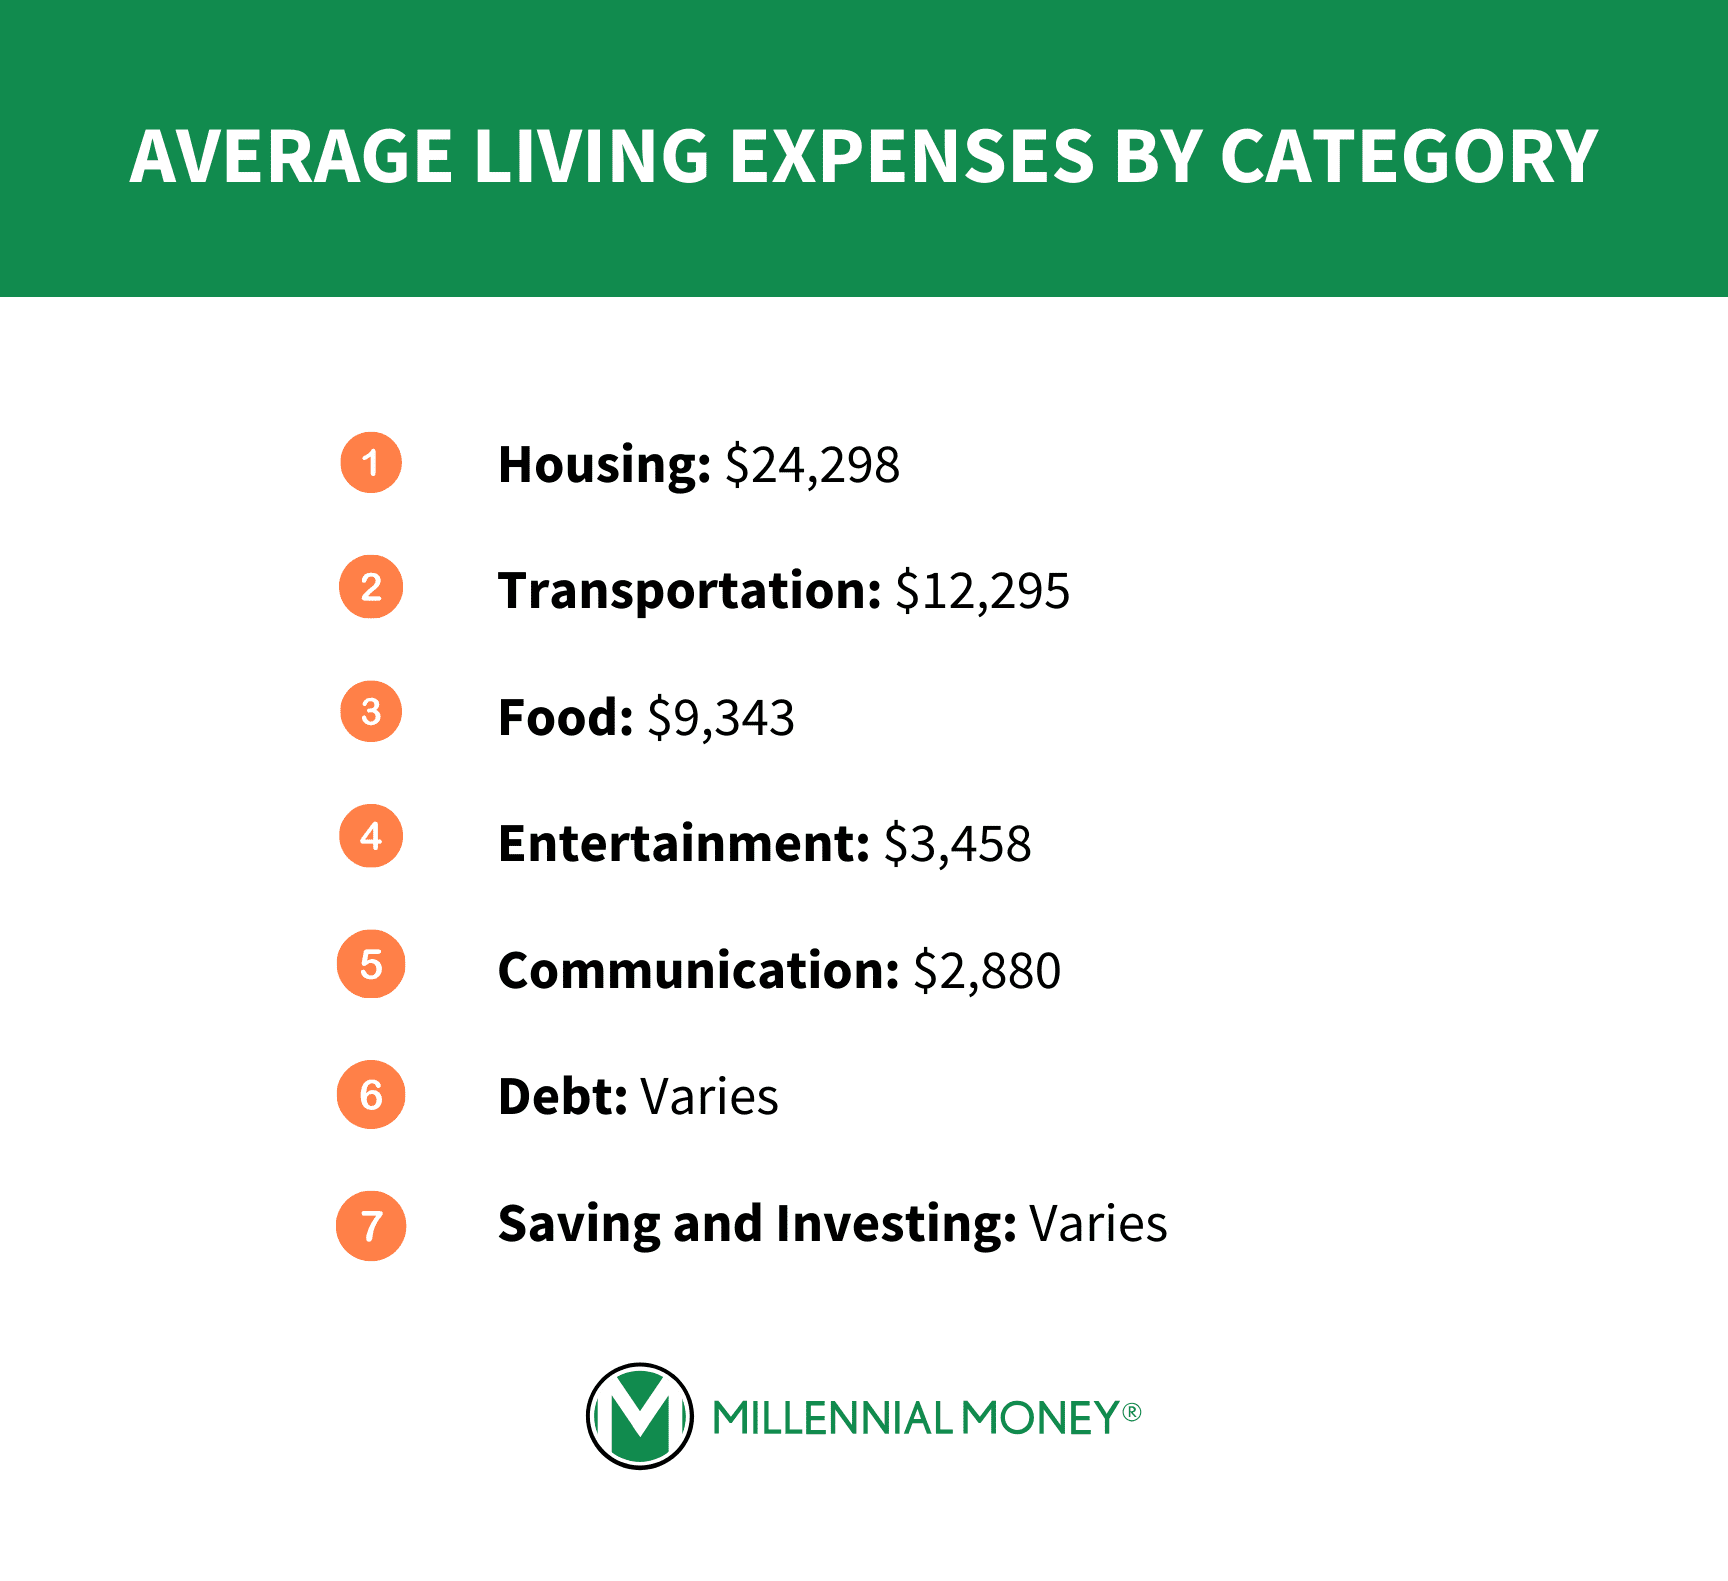 Average Living Expenses by Category